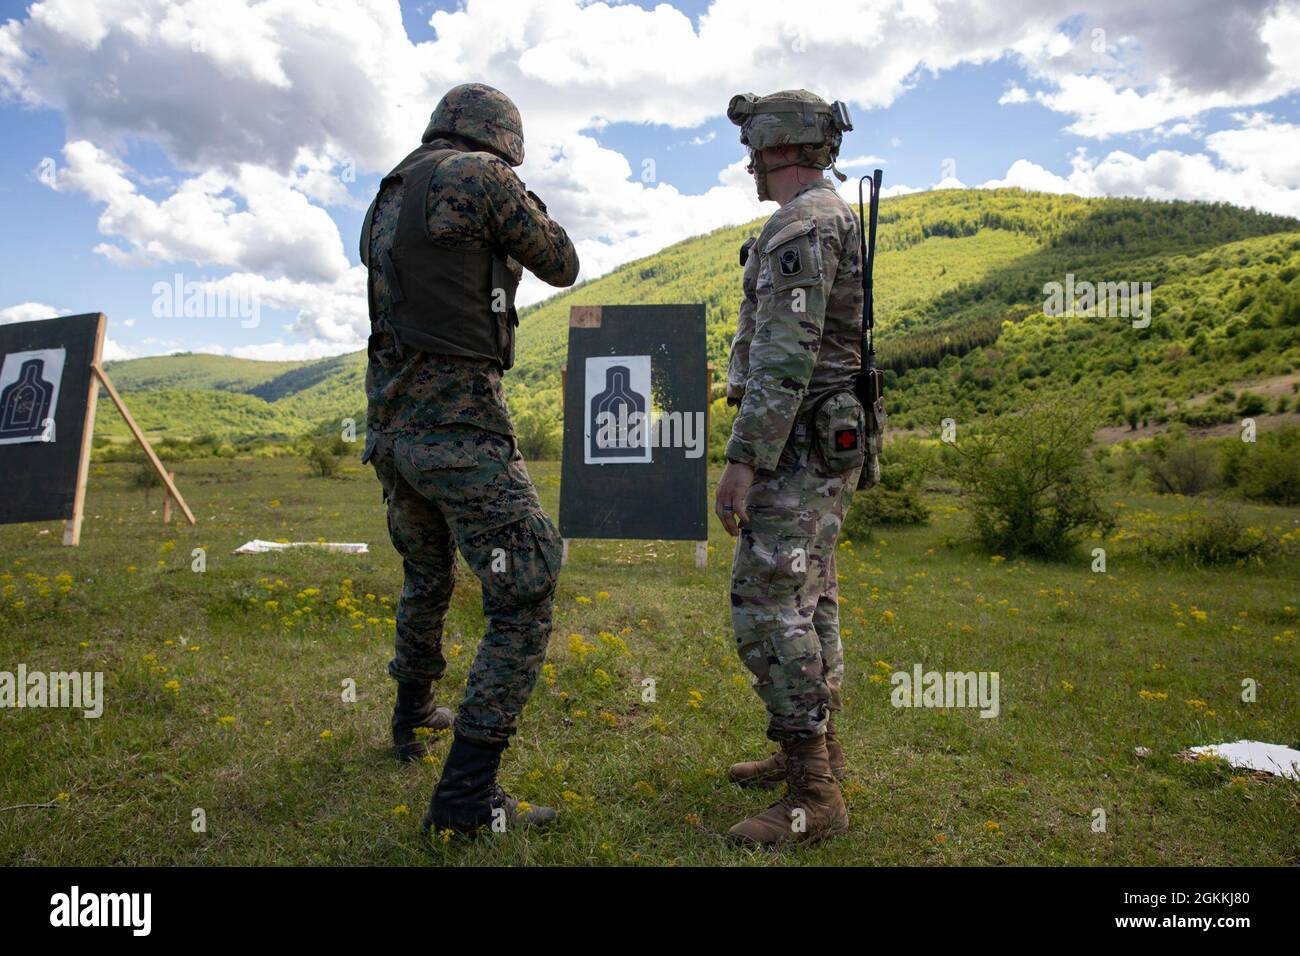 Private Amar Gluhić (front left), a military police soldier with the Bosnia and Herzegovina Armed Forces, shoots the Mossberg 500 tactical shotgun with assistance from Sgt. 1st Class Michael Kendall (front right), a platoon sergeant with 2nd Battalion, 124th Infantry Regiment, 53rd Infantry Brigade Combat Team, at Manjača Training Area, Bosnia and Herzegovina (BiH), May 18, 2021. Immediate Response 21 supports DEFENDER-Europe 21, a prime example of U.S. forces working closely with NATO allies and partners in peacetime. Together, joint forces can deter outside aggression. Stock Photo